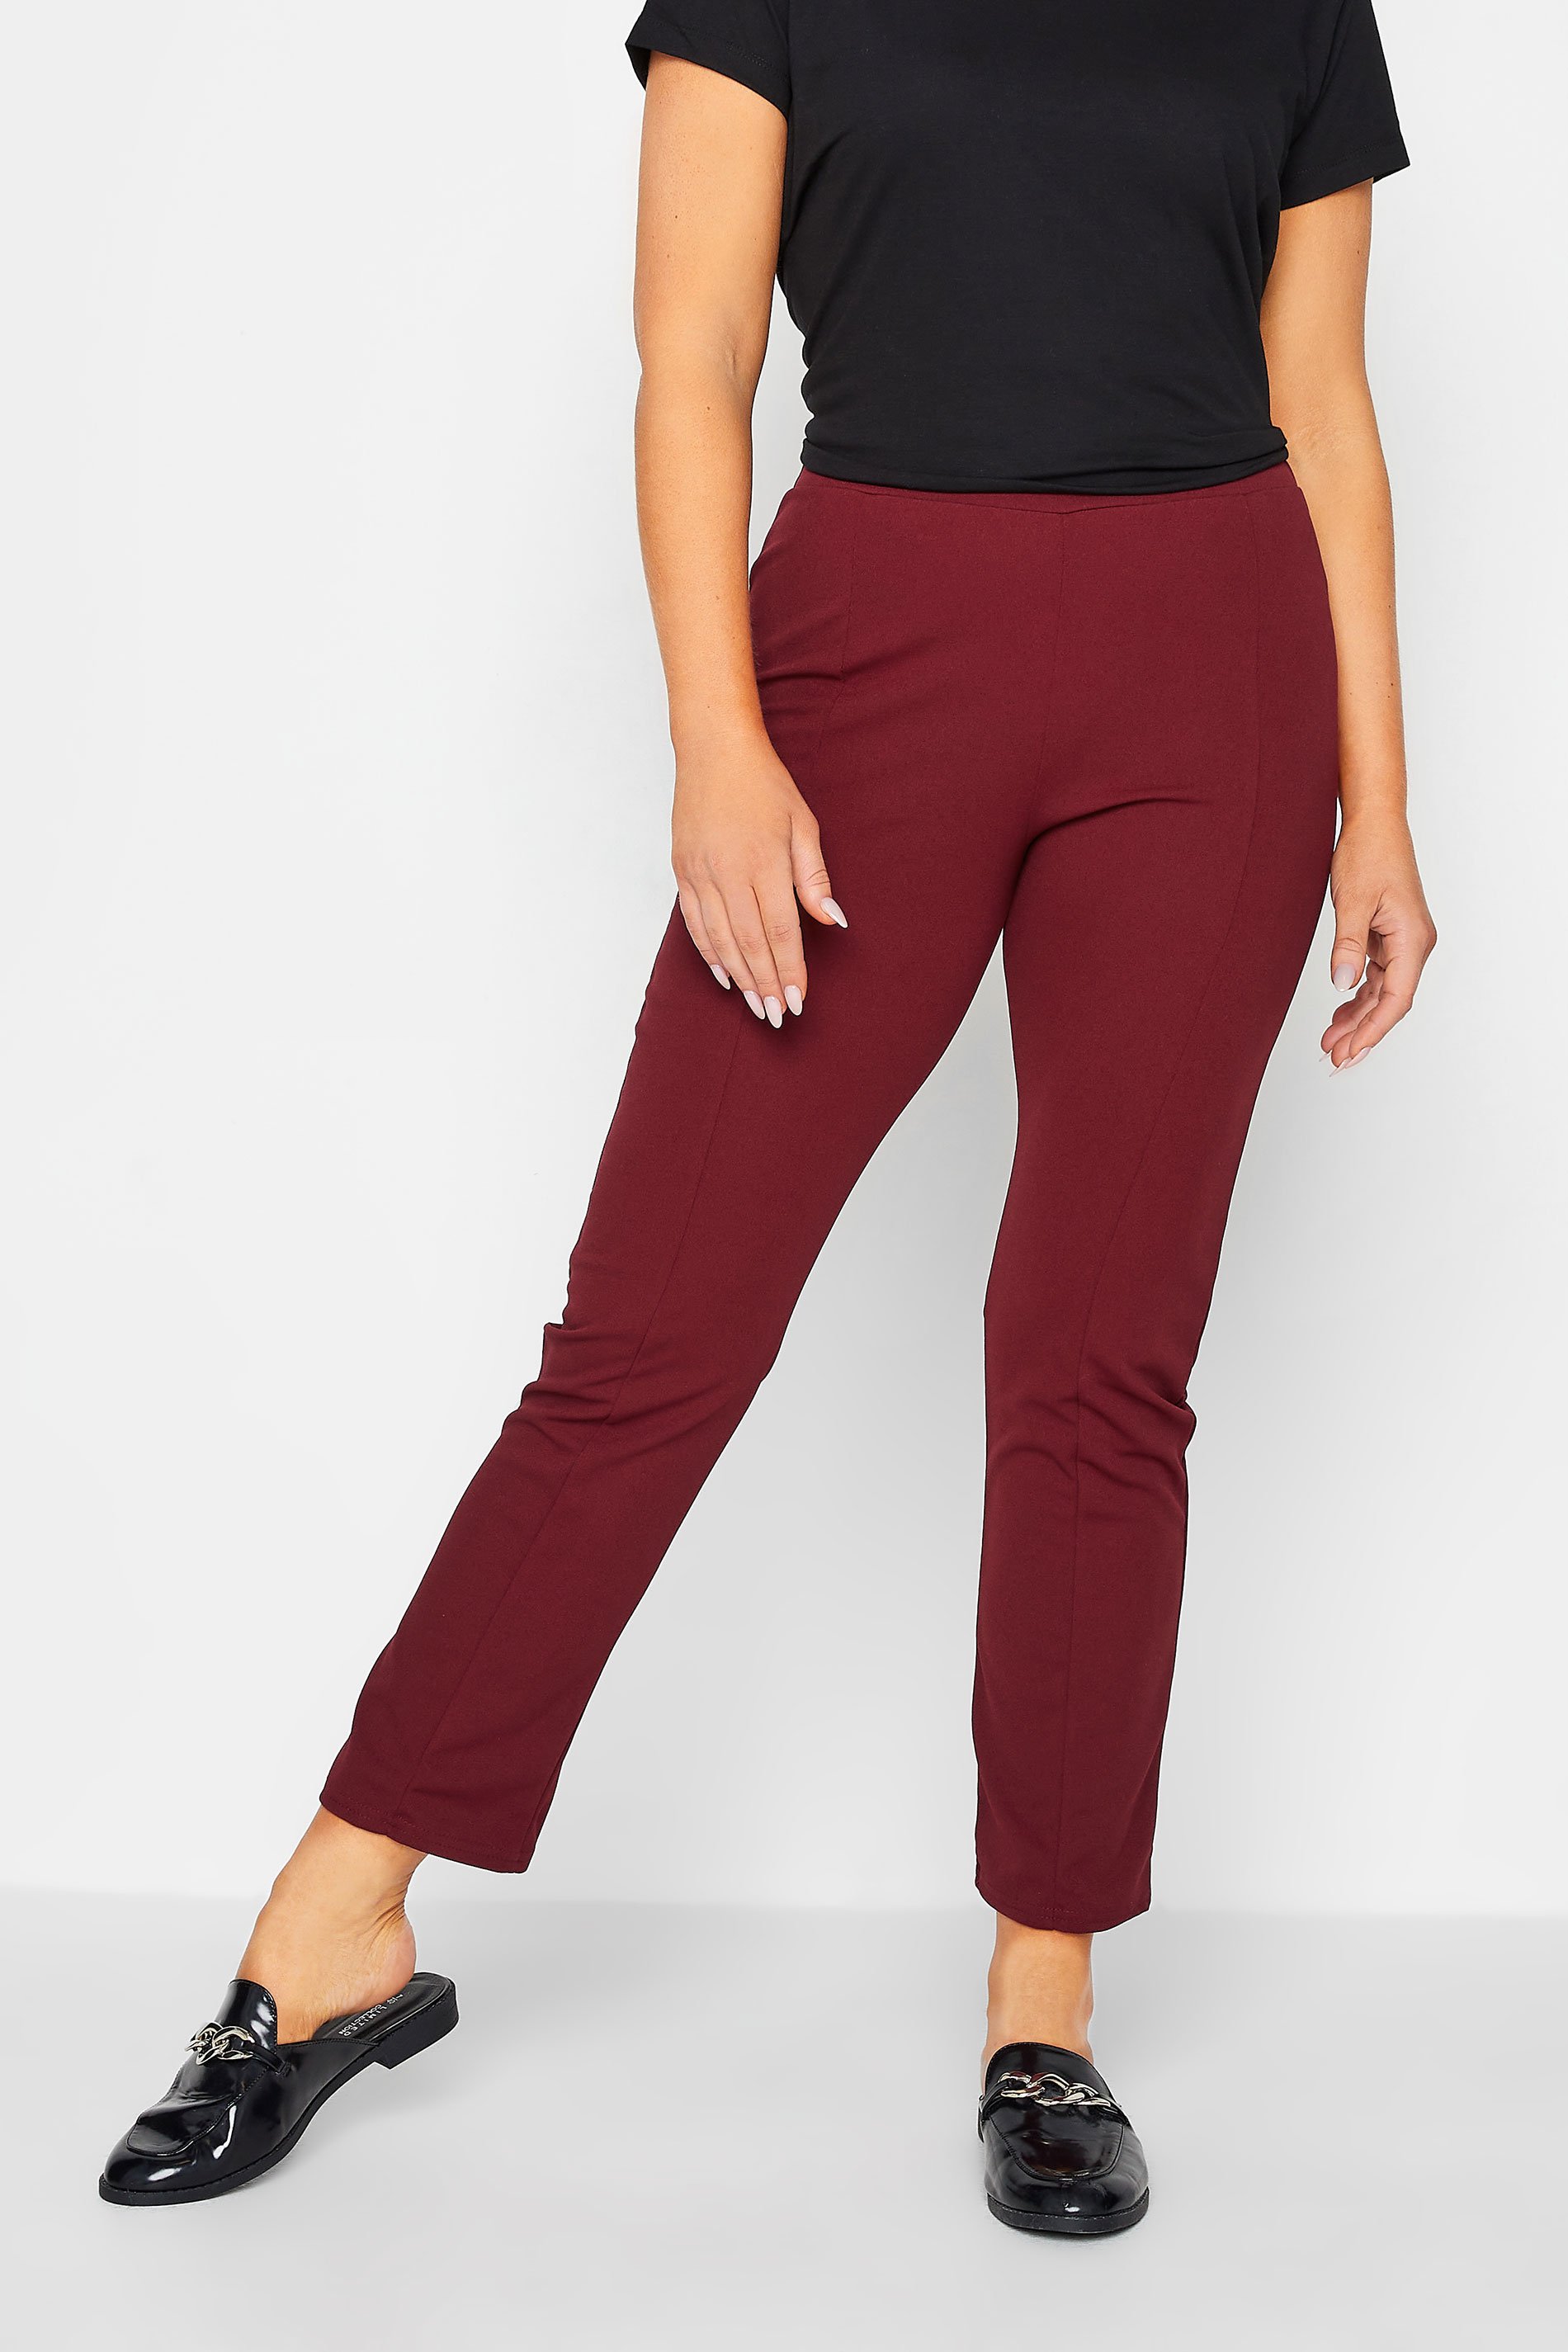 M&Co Burgundy Red Stretch Tapered Trousers | M&Co 1